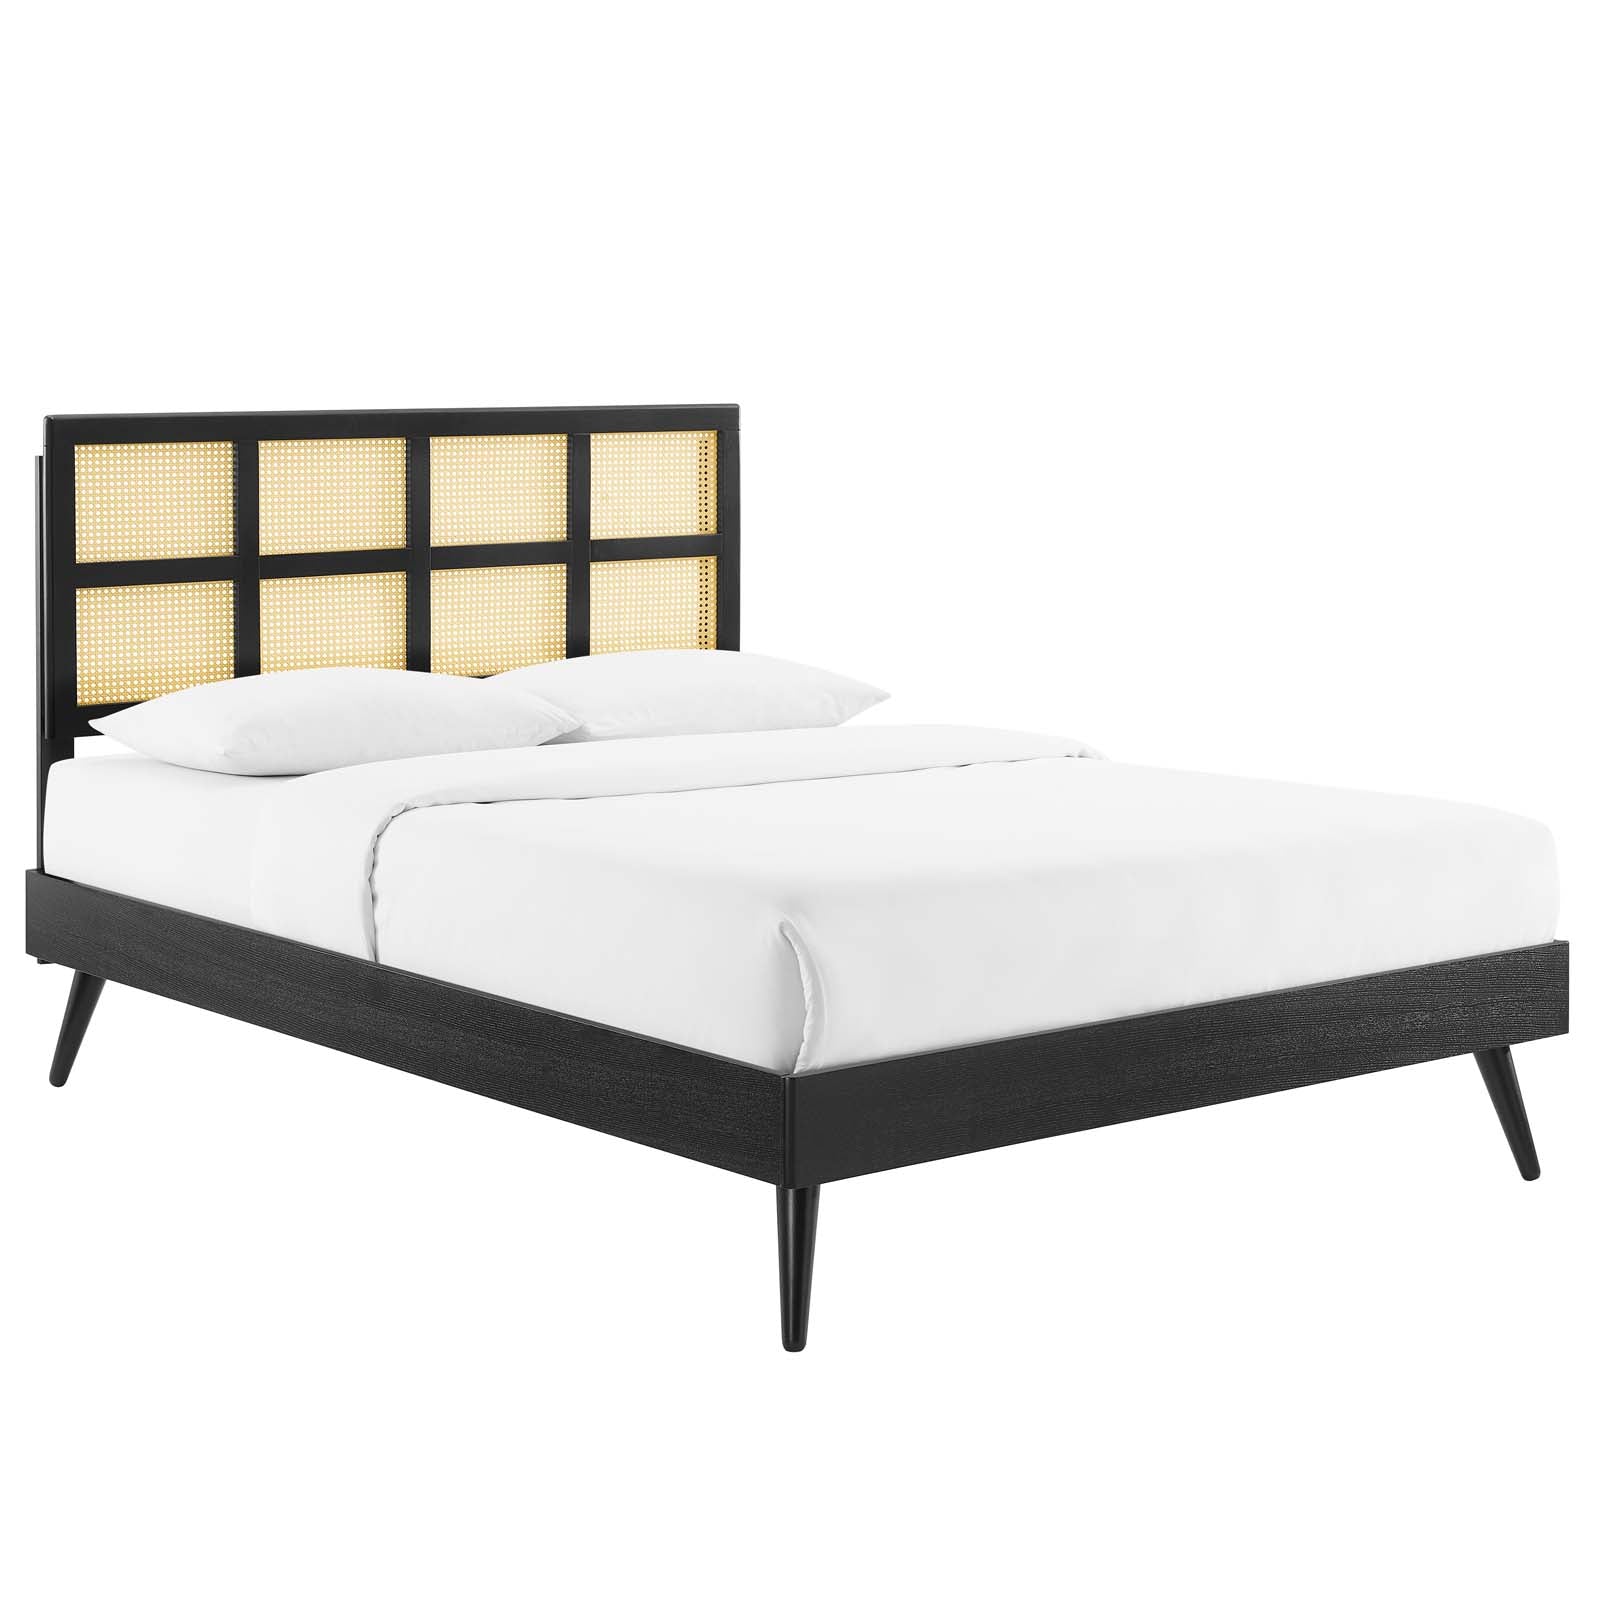 Modway Beds - Sidney-Cane-and-Wood-King-Platform-Bed-With-Splayed-Legs-Black